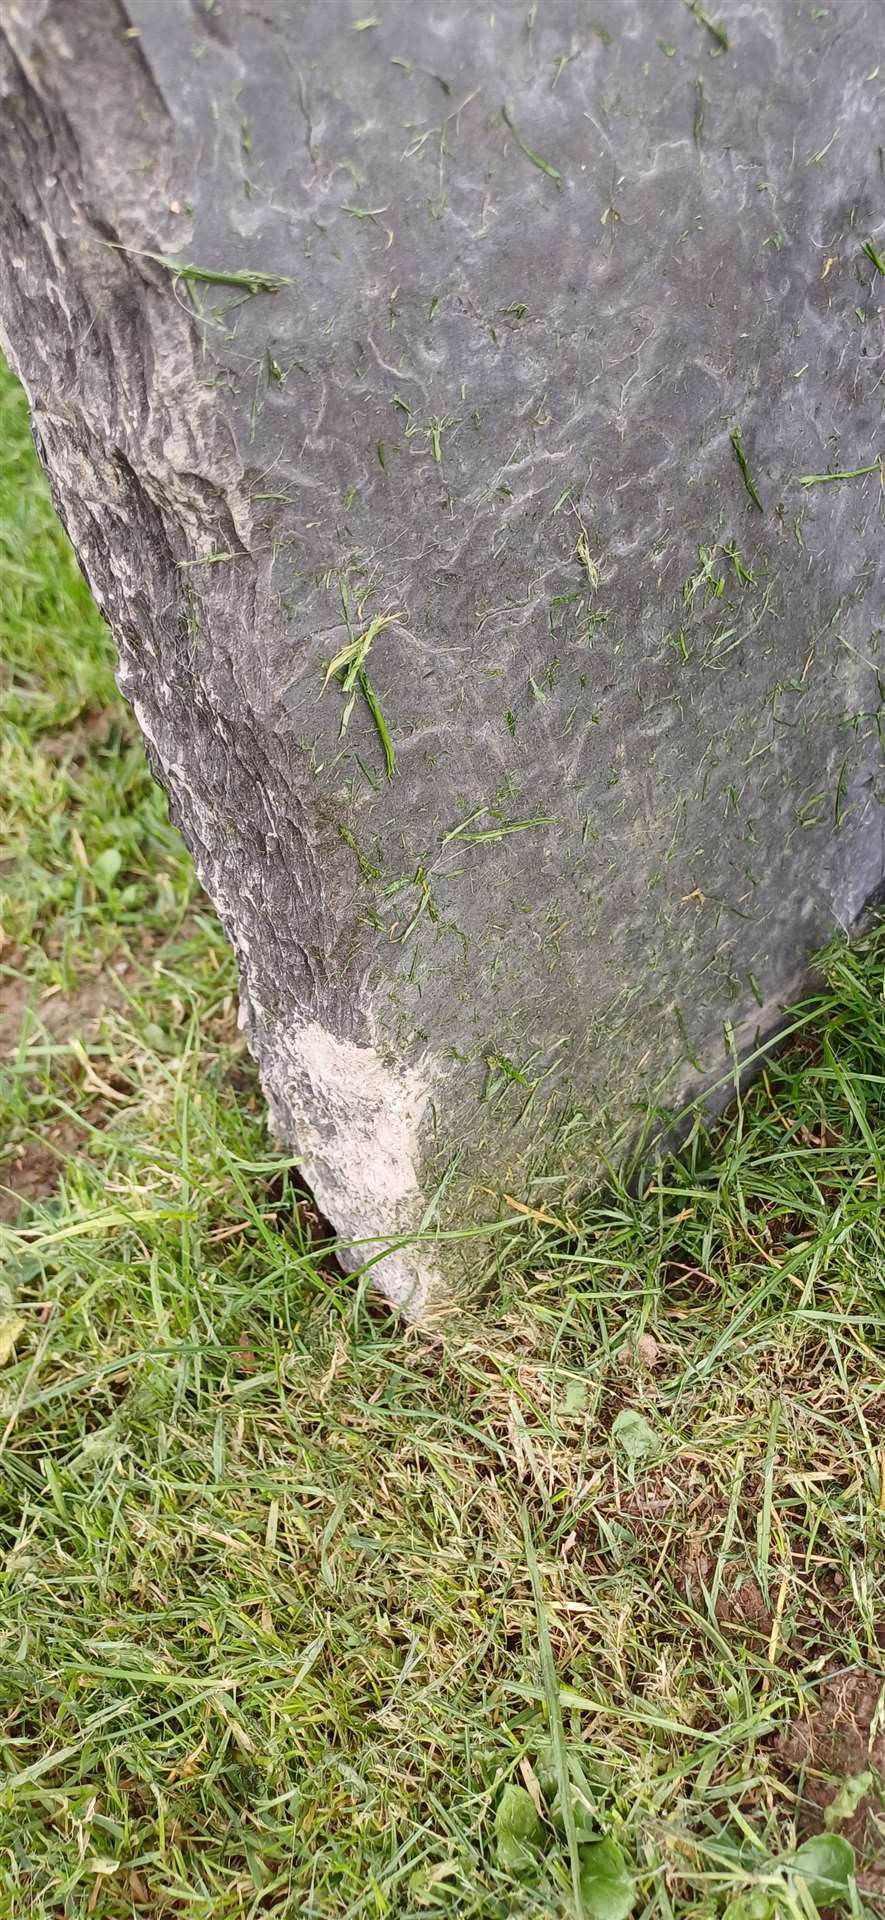 The damage to the gravestone.